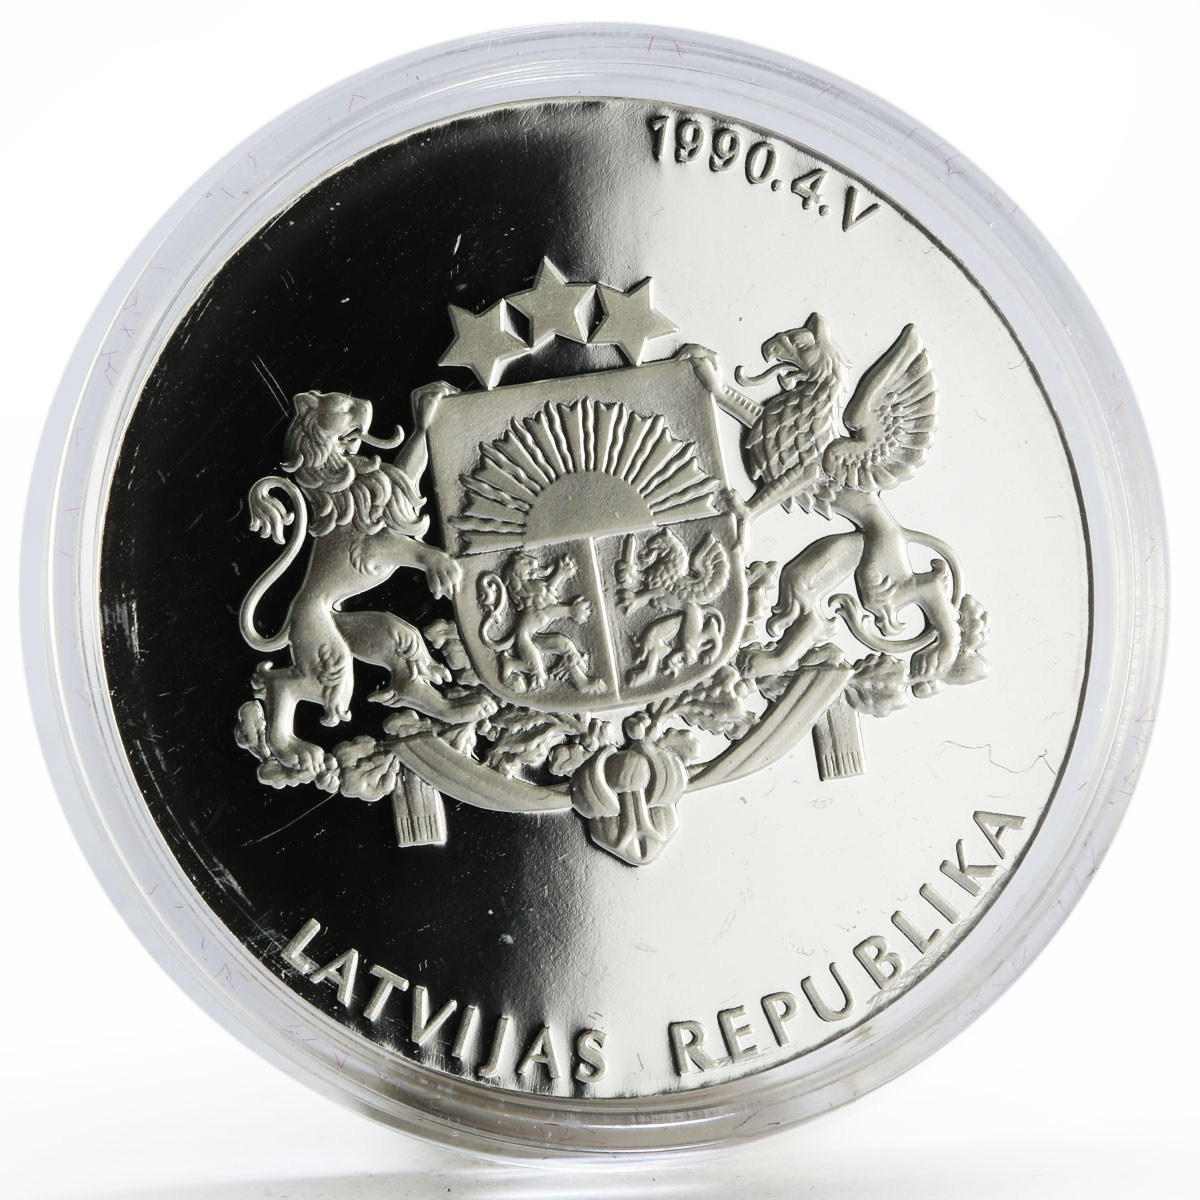 Latvia 1 lats State series Rebirth of the State proof silver coin 2007